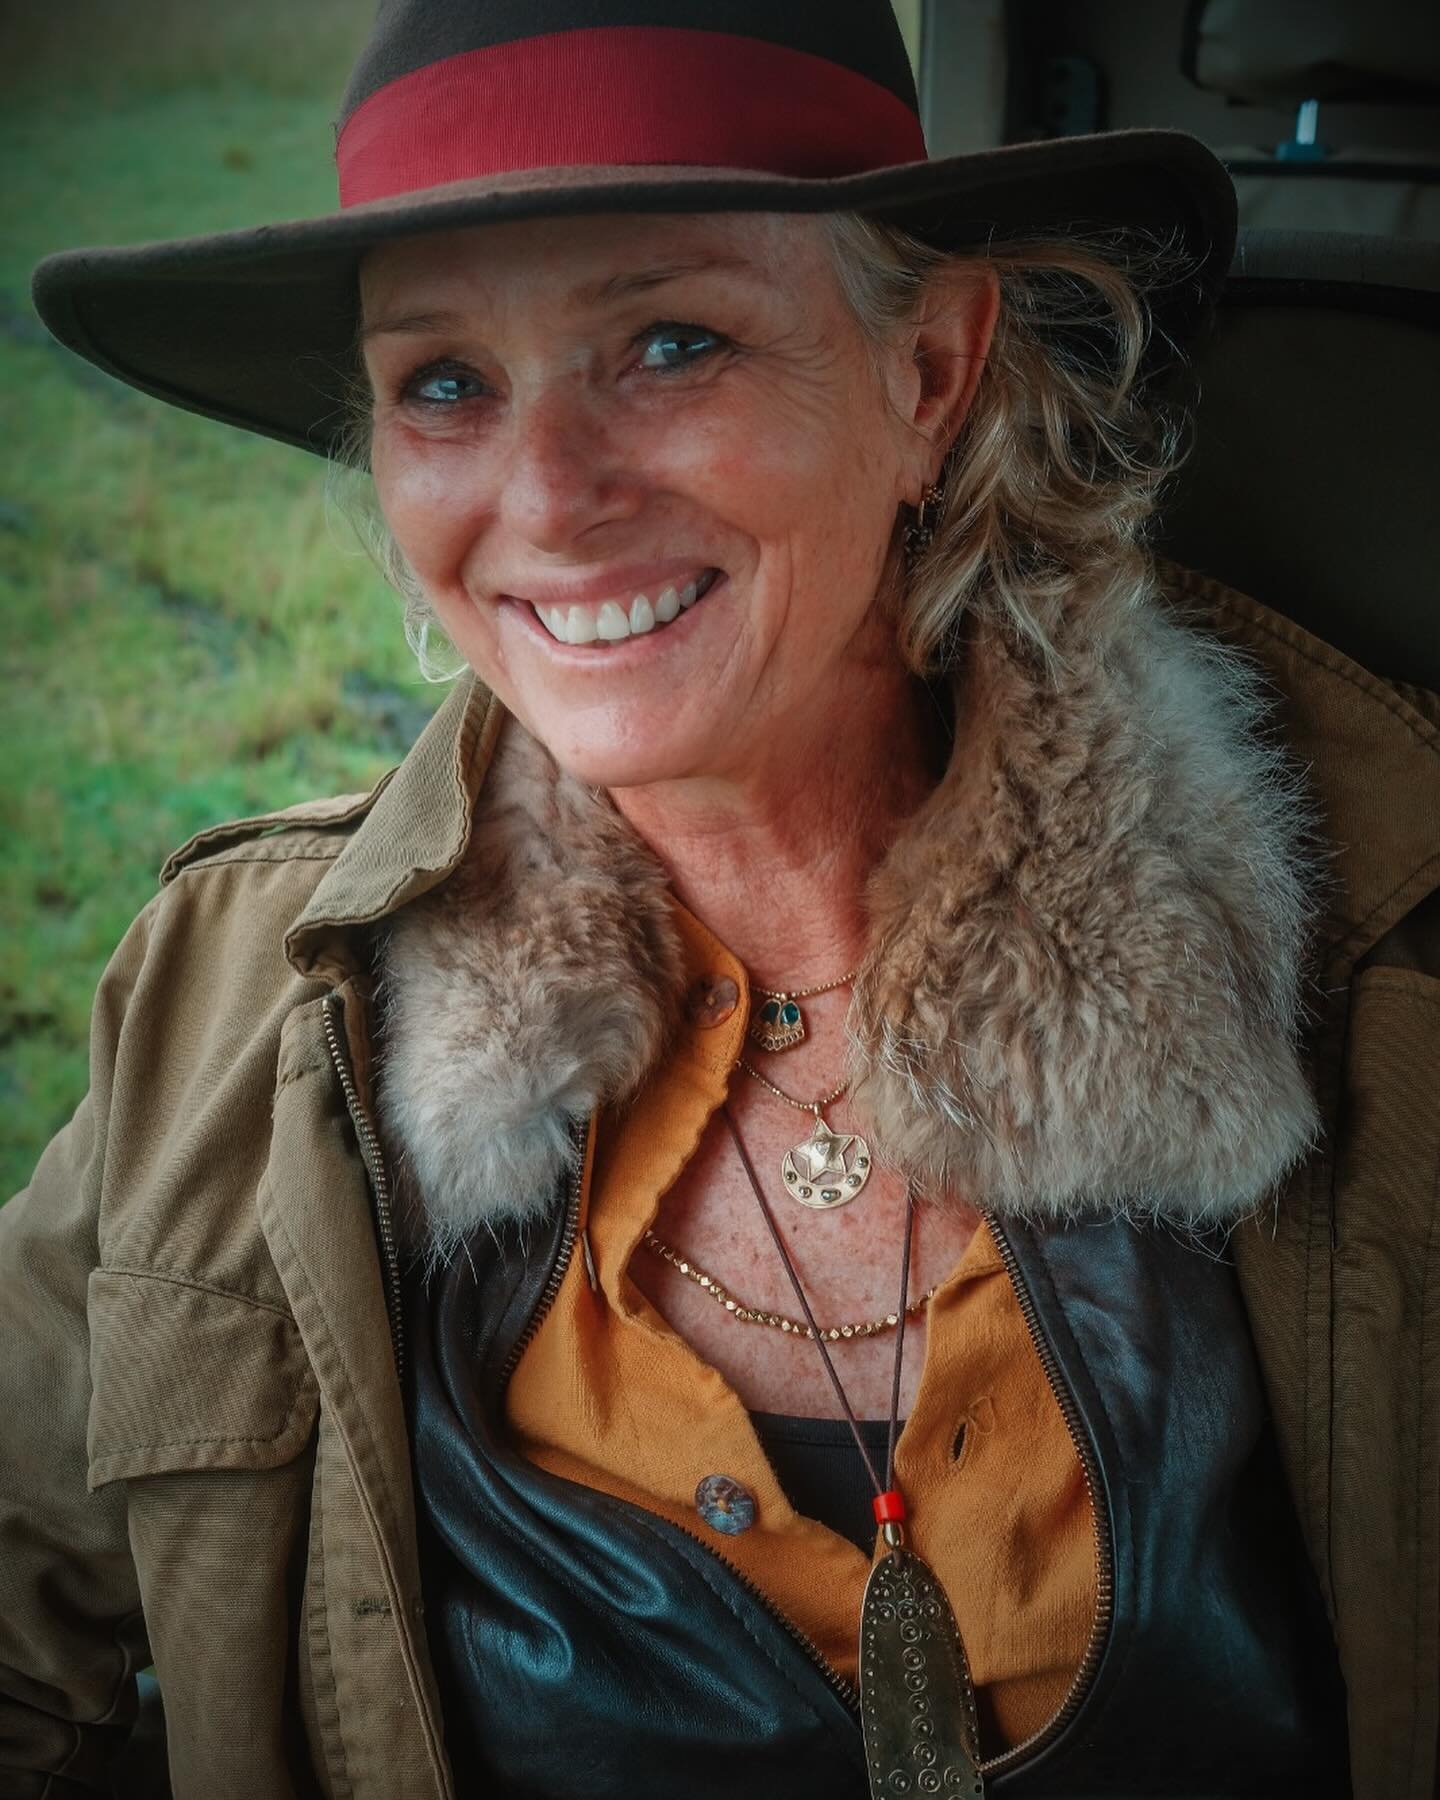 Exquisitely attired, Sally&rsquo;s preferred safari necklace layers of loveliness include:
&bull;Vichnu&rsquo;s Feet Necklace (glorious gold soles inlaid with emeralds and twinkly ruby toes)
&bull;Love You To The Moon Necklace (available in silver or